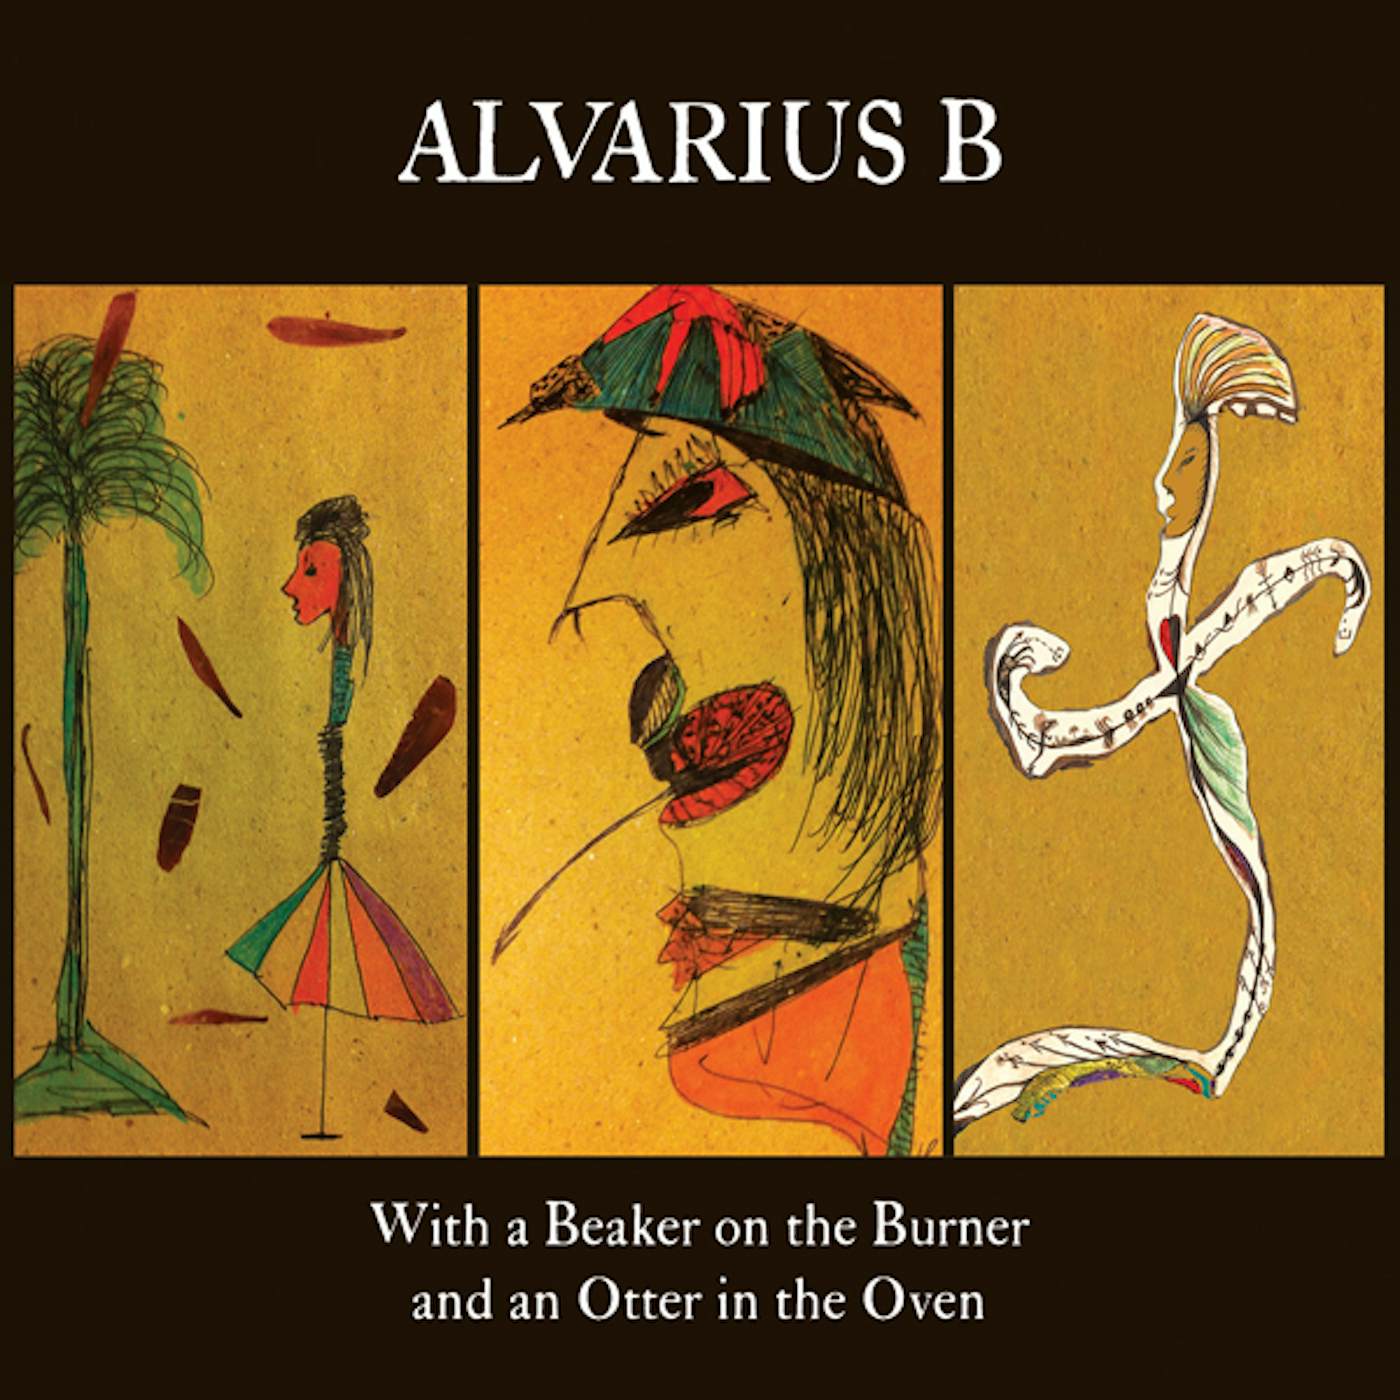 Alvarius B. WITH A BEAKER ON THE BURNER & AN OTTER IN THE OVEN CD